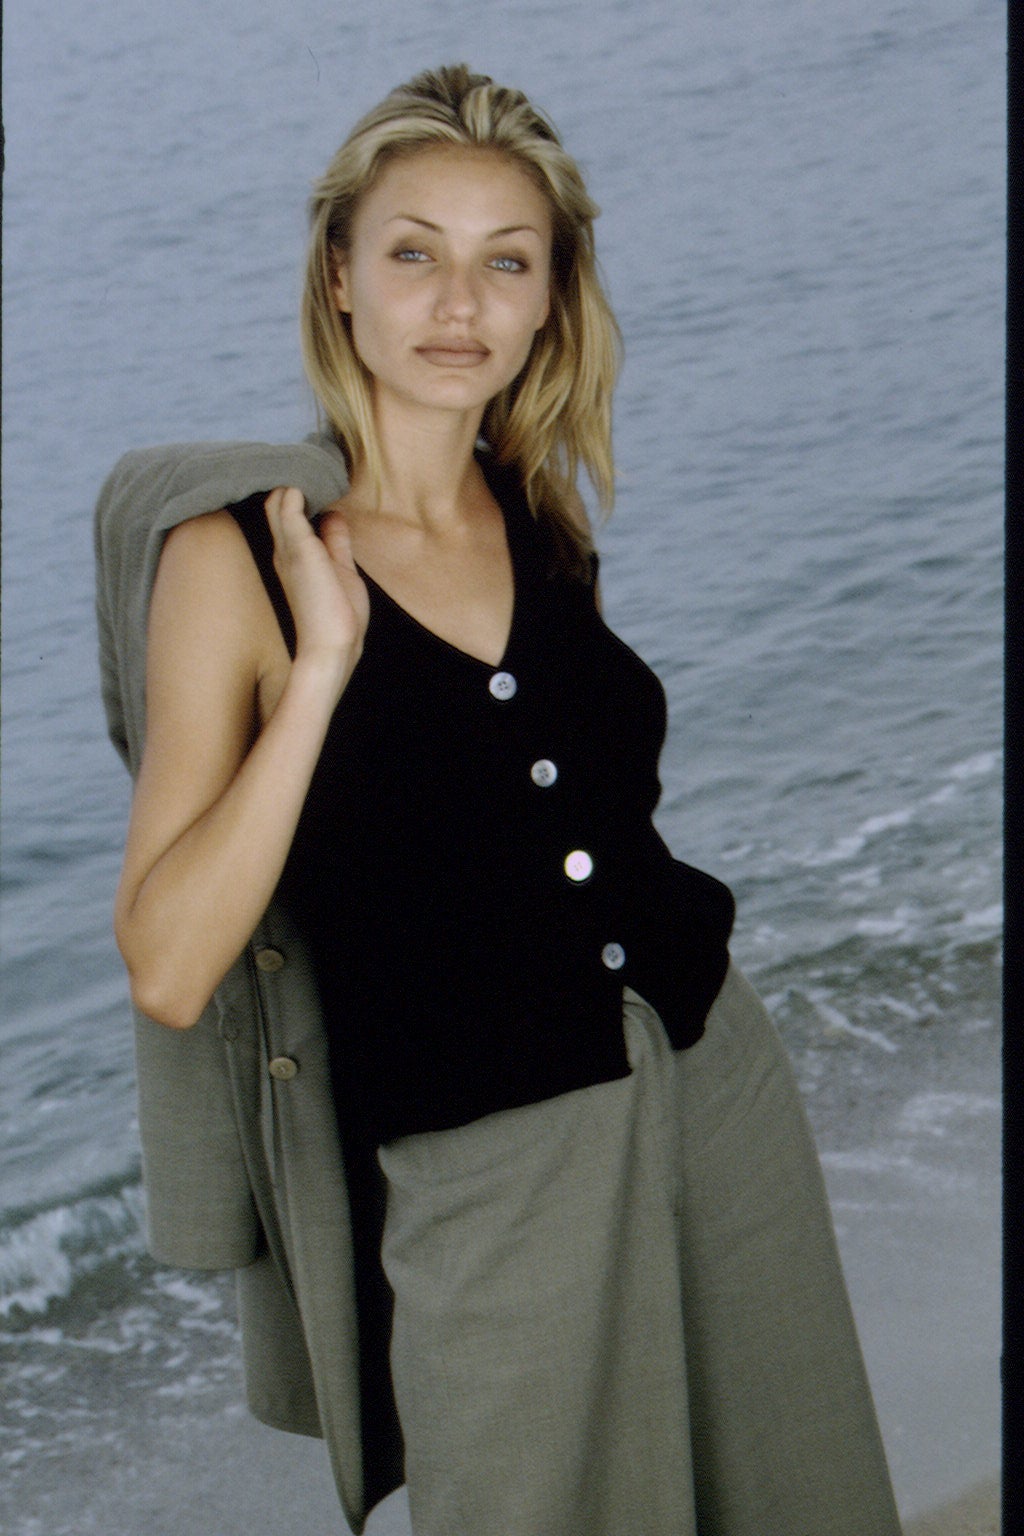 Cameron Diaz 90s: From Model to Hollywood Star